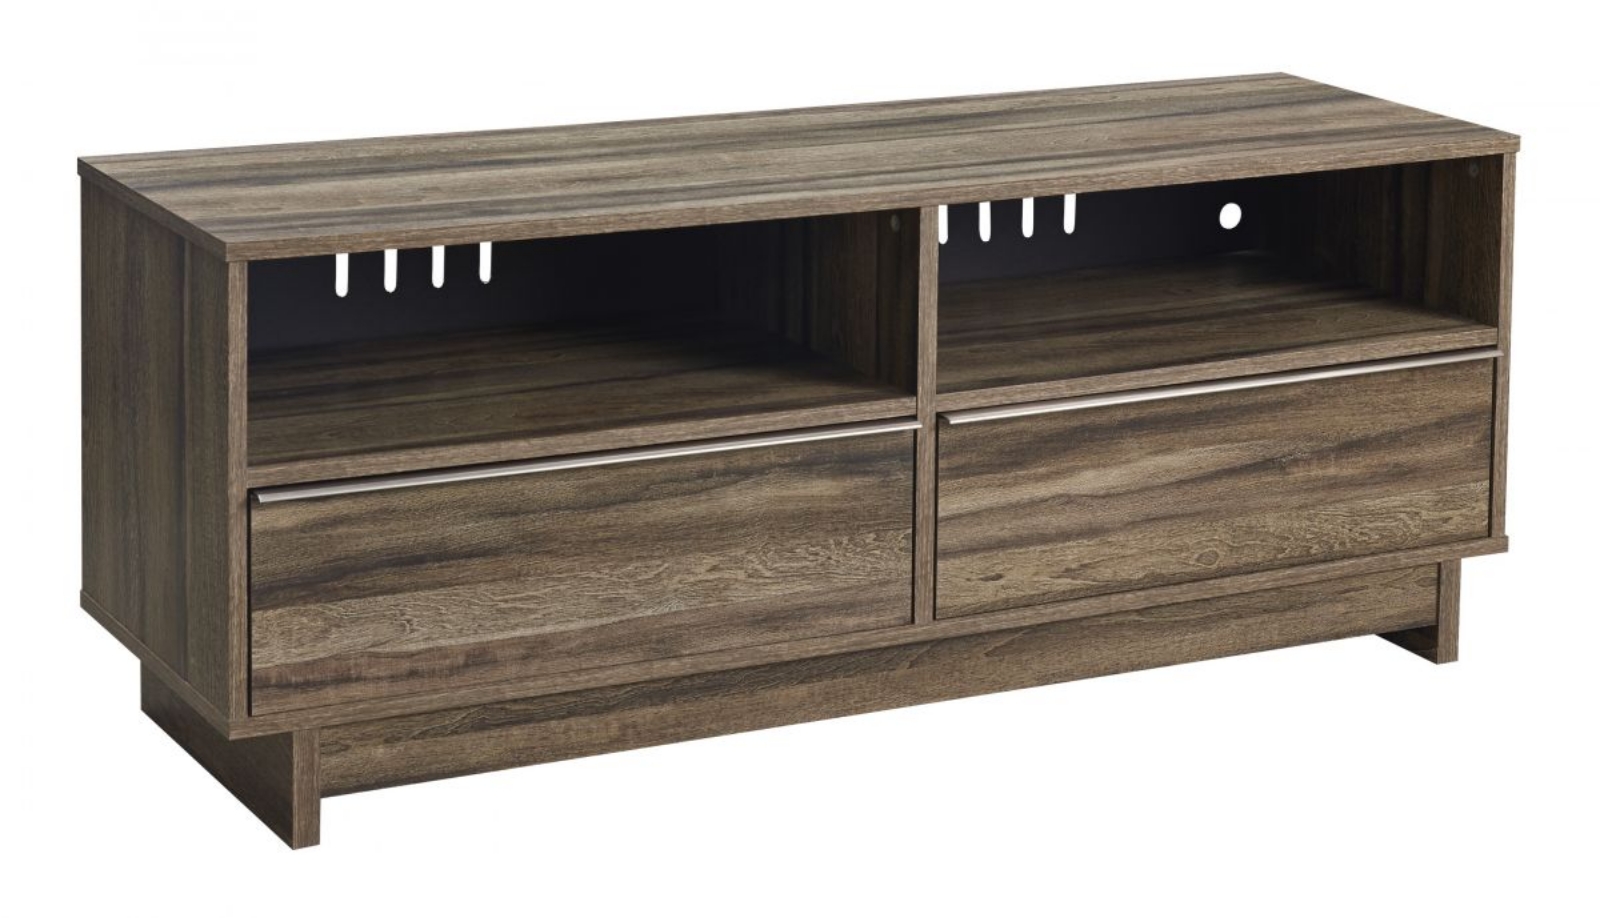 Picture of Shallifer TV Stand